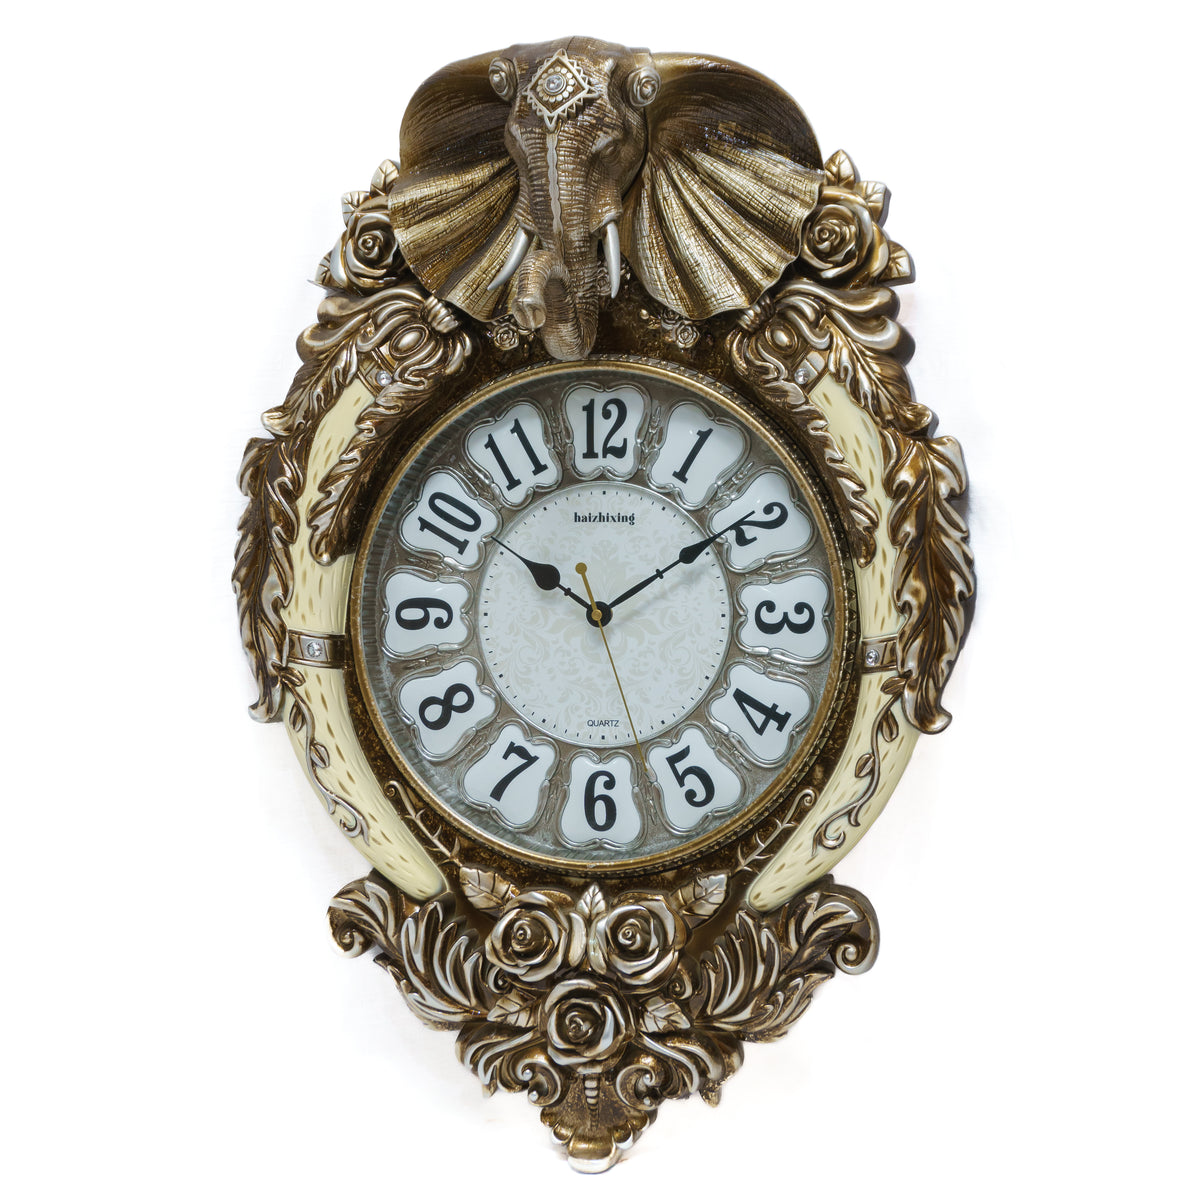 Haizhixing Quartz Wall Clock: Elephant Face, Decimal Numbers, Floral Theme in Oval Shape